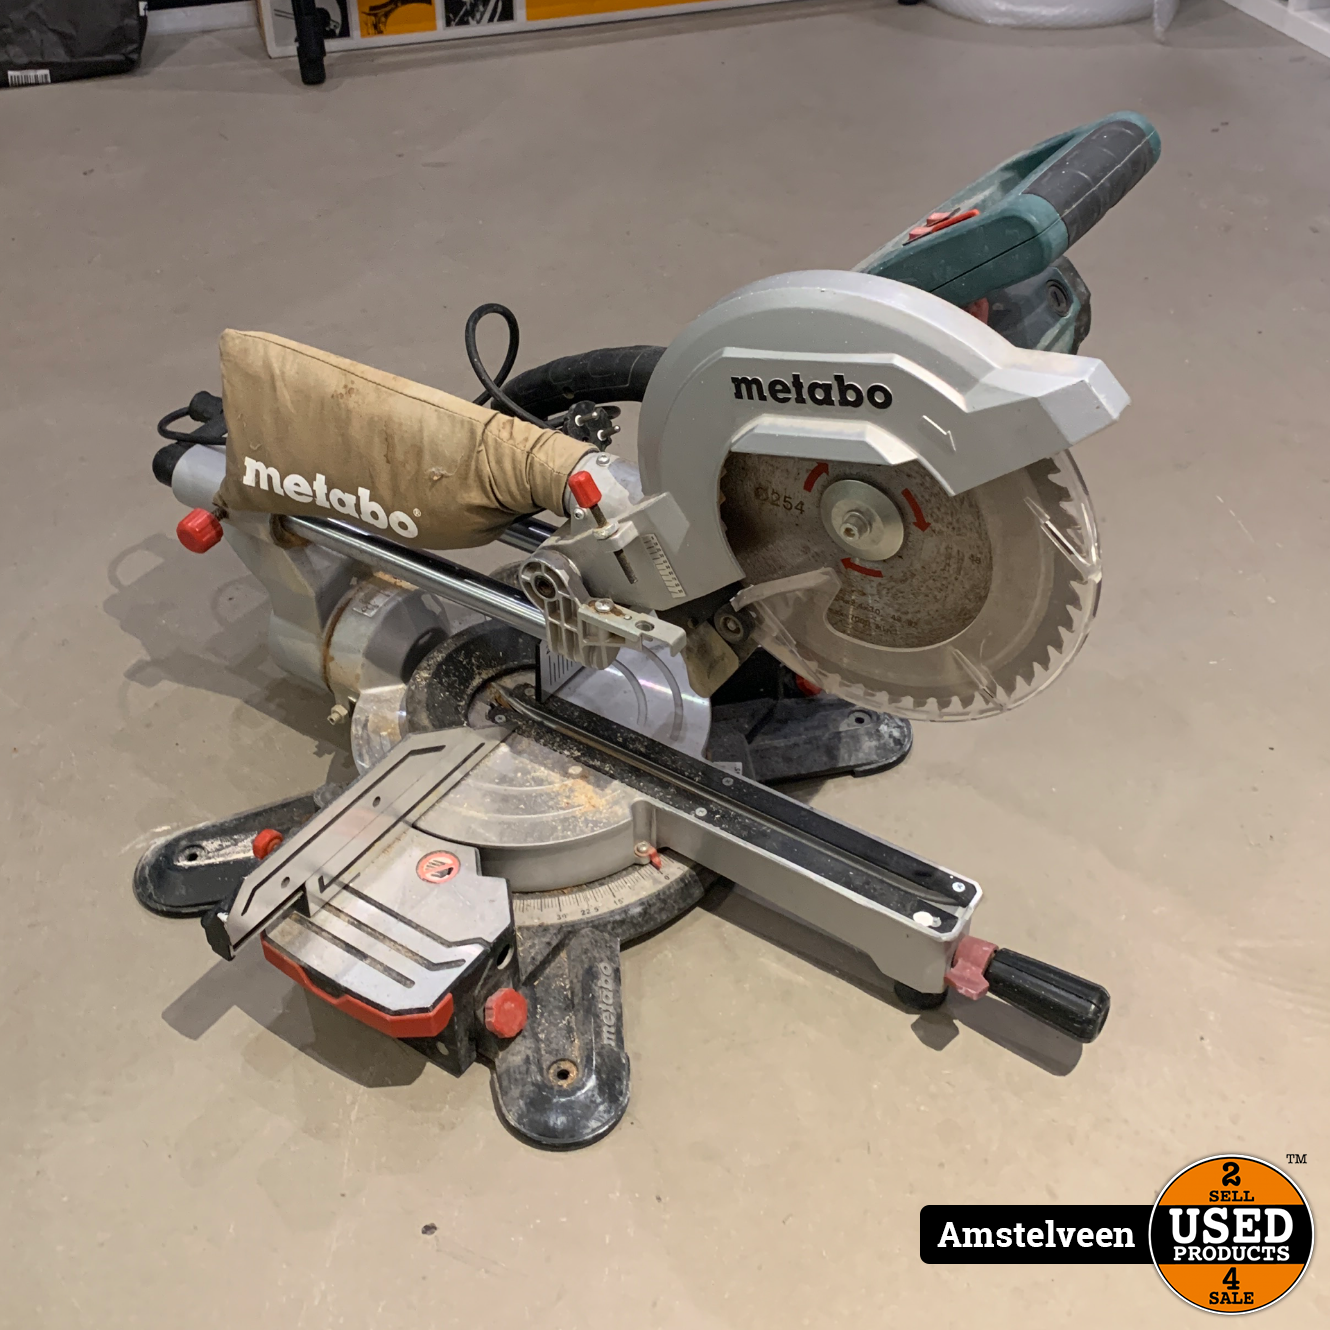 metabo METABO KGS254M - 1800 W 254 mm | Nette Staat - Used Products